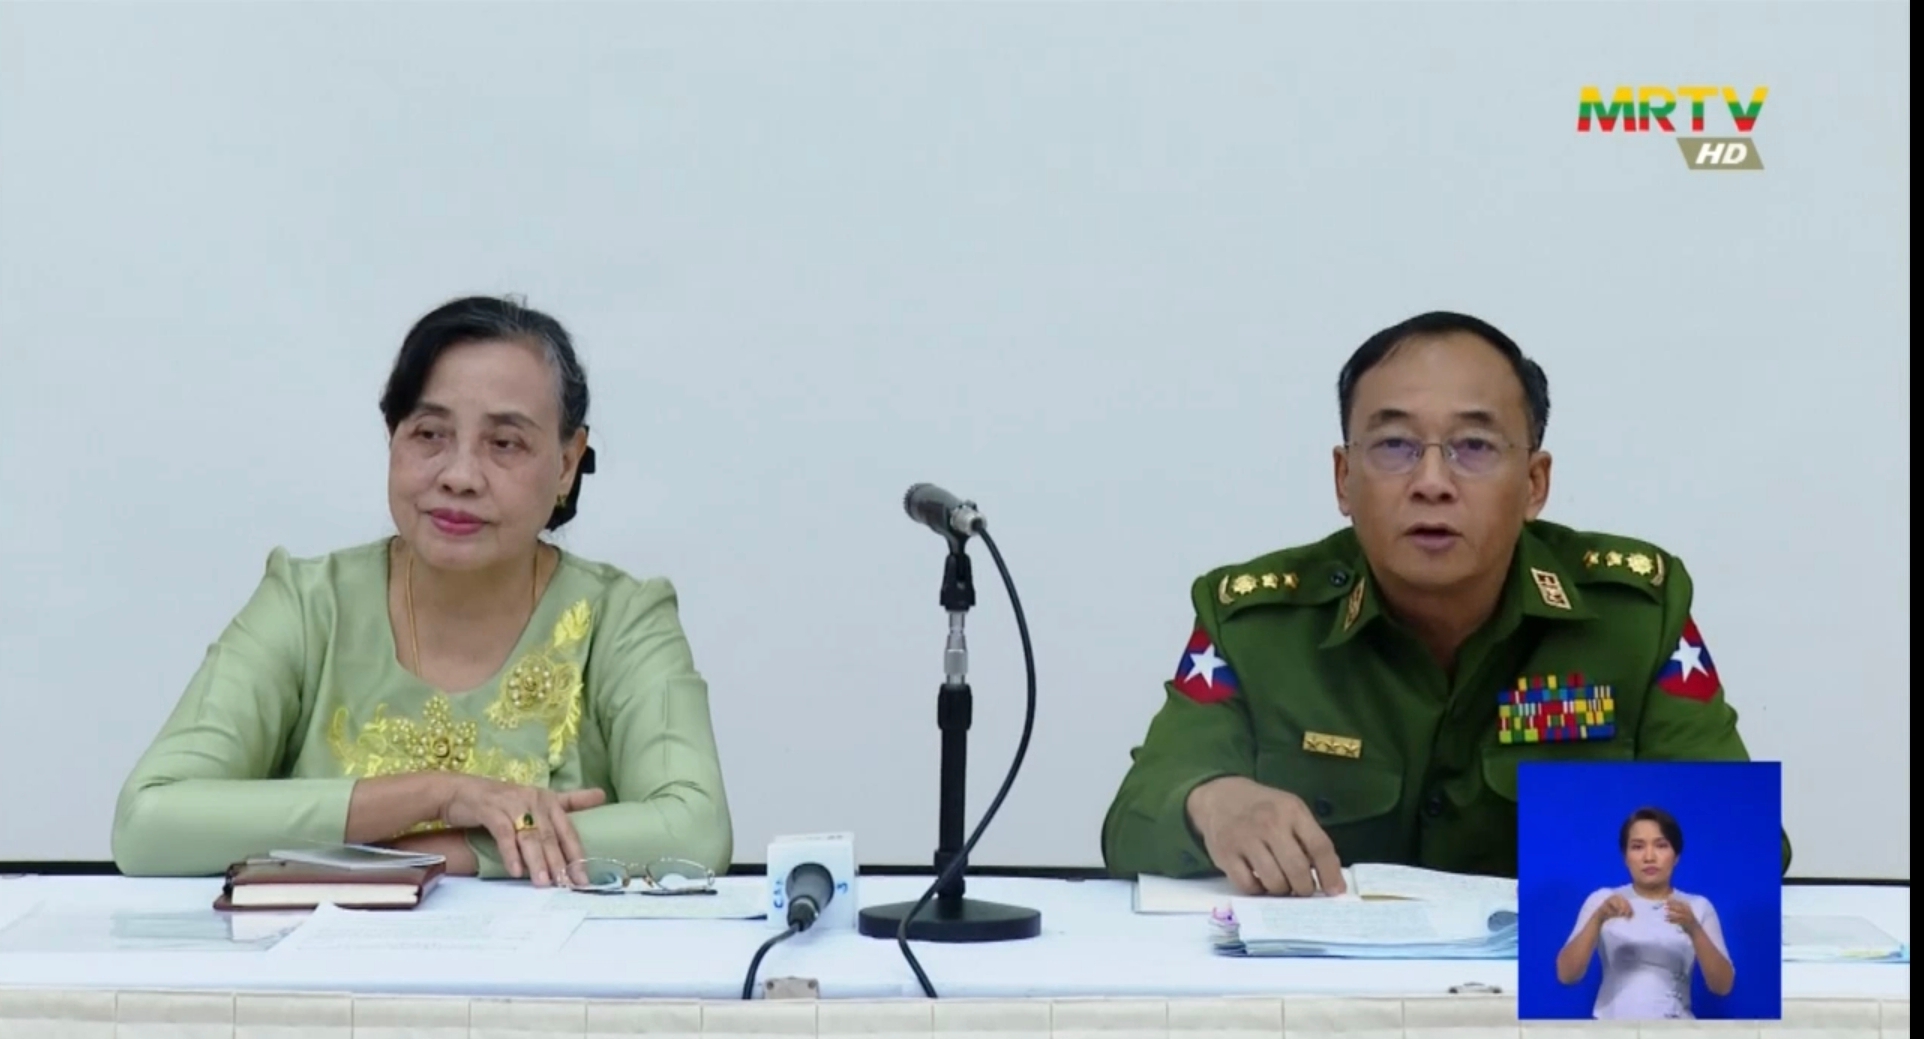 Colonel Wunna Aung and Saw Mra Razar Lin at the joint press conference. (Photo: MRTV)